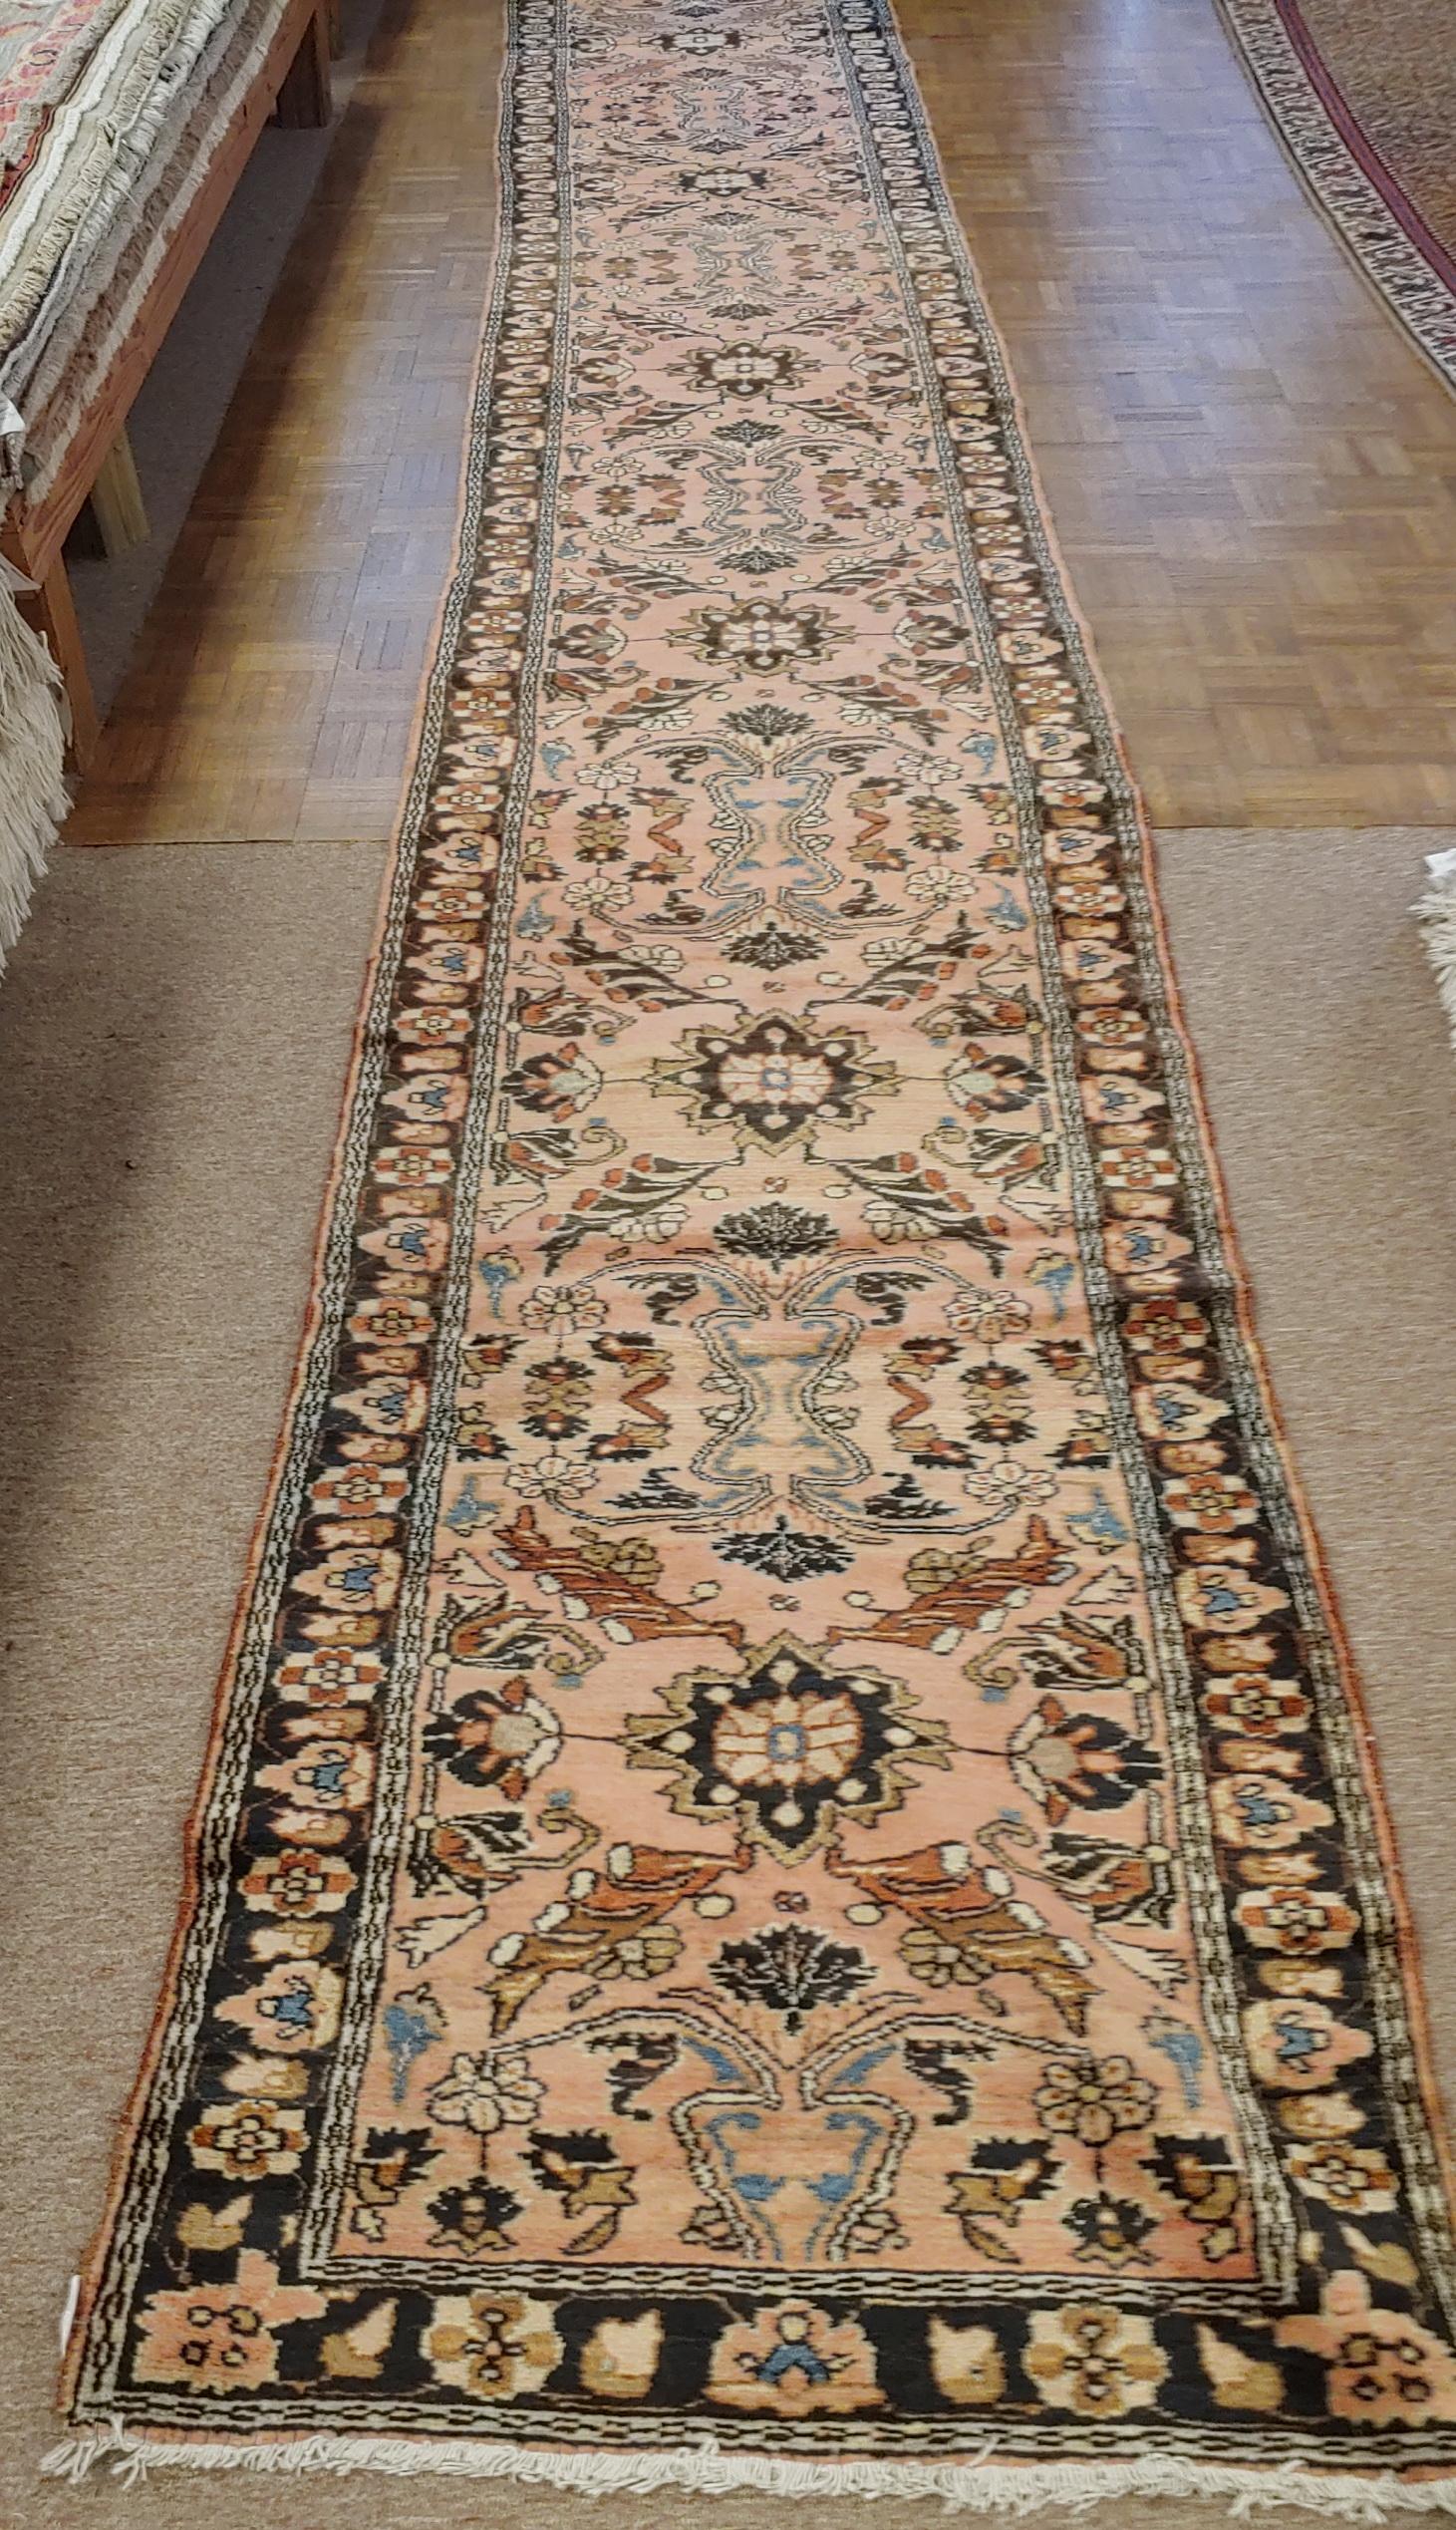 Sarouk Farahan Antique Persian Lilyhan Rug, Rust/Mauve Colored Field, 1915 runner 2-5x16=4 For Sale